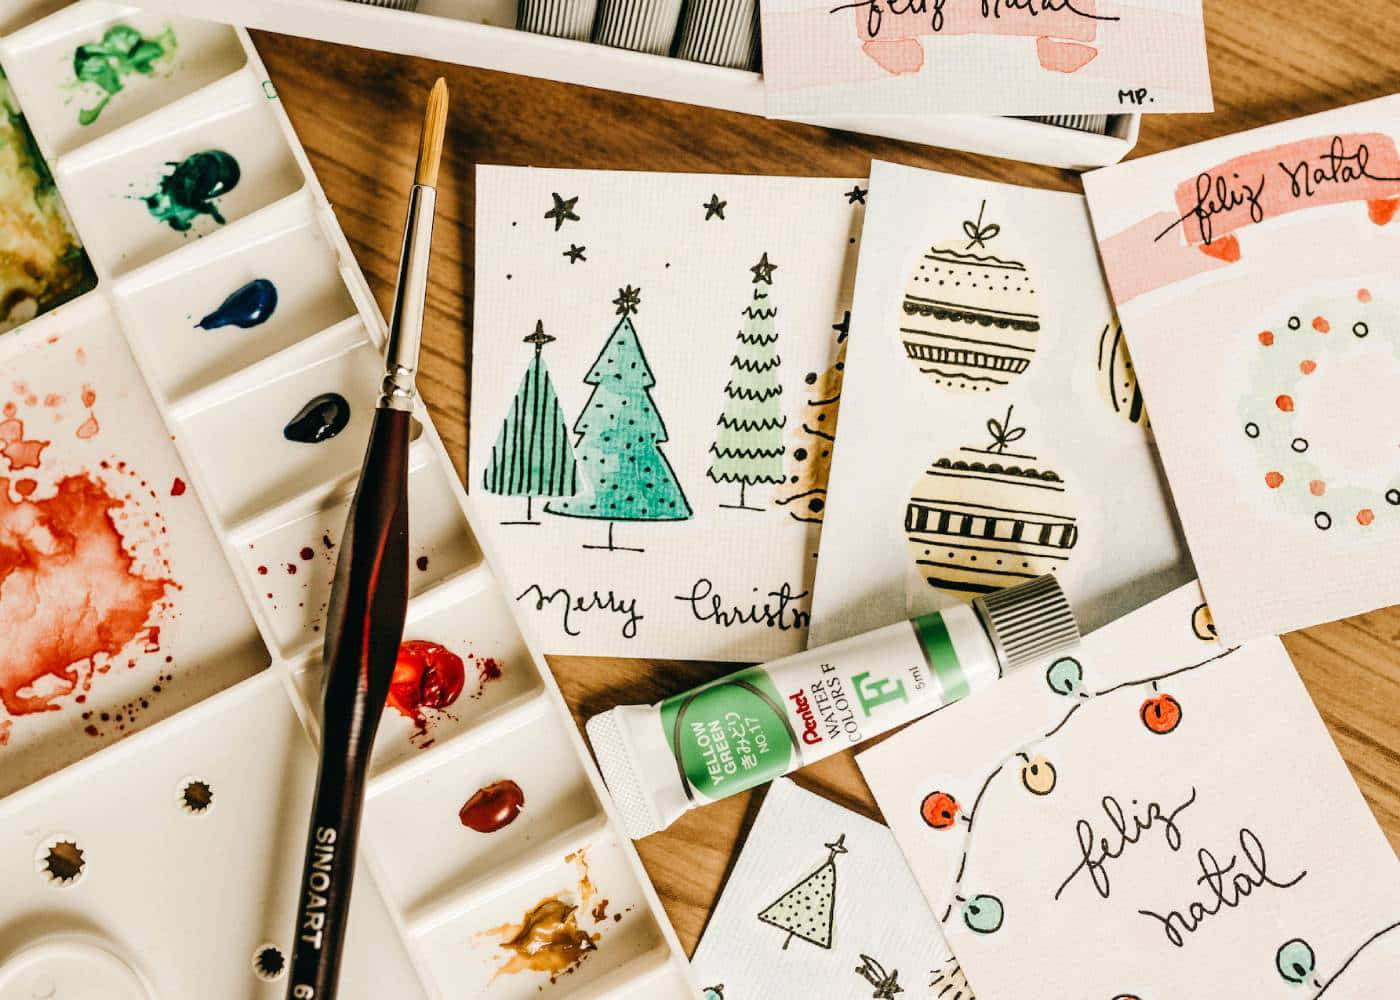 A Tray Of Paints And Brushes With Christmas Cards